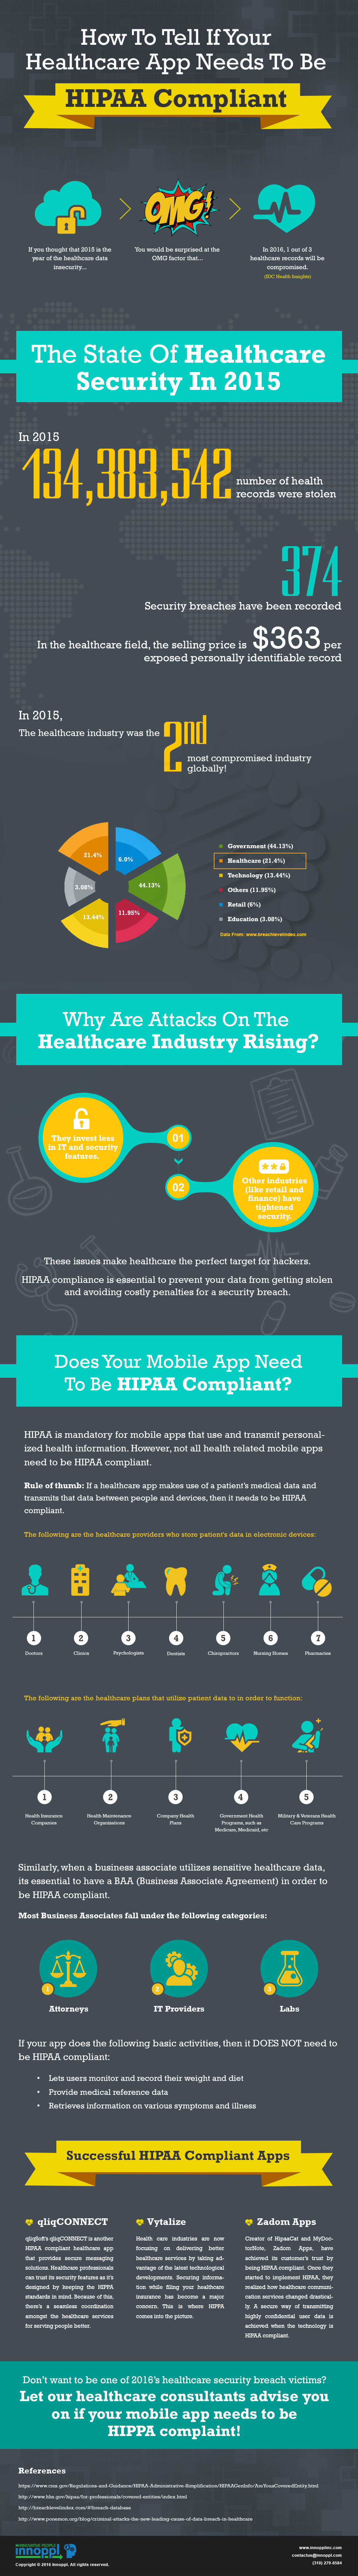 How To Tell If Your Healthcare App Needs To Be HIPAA Compliant